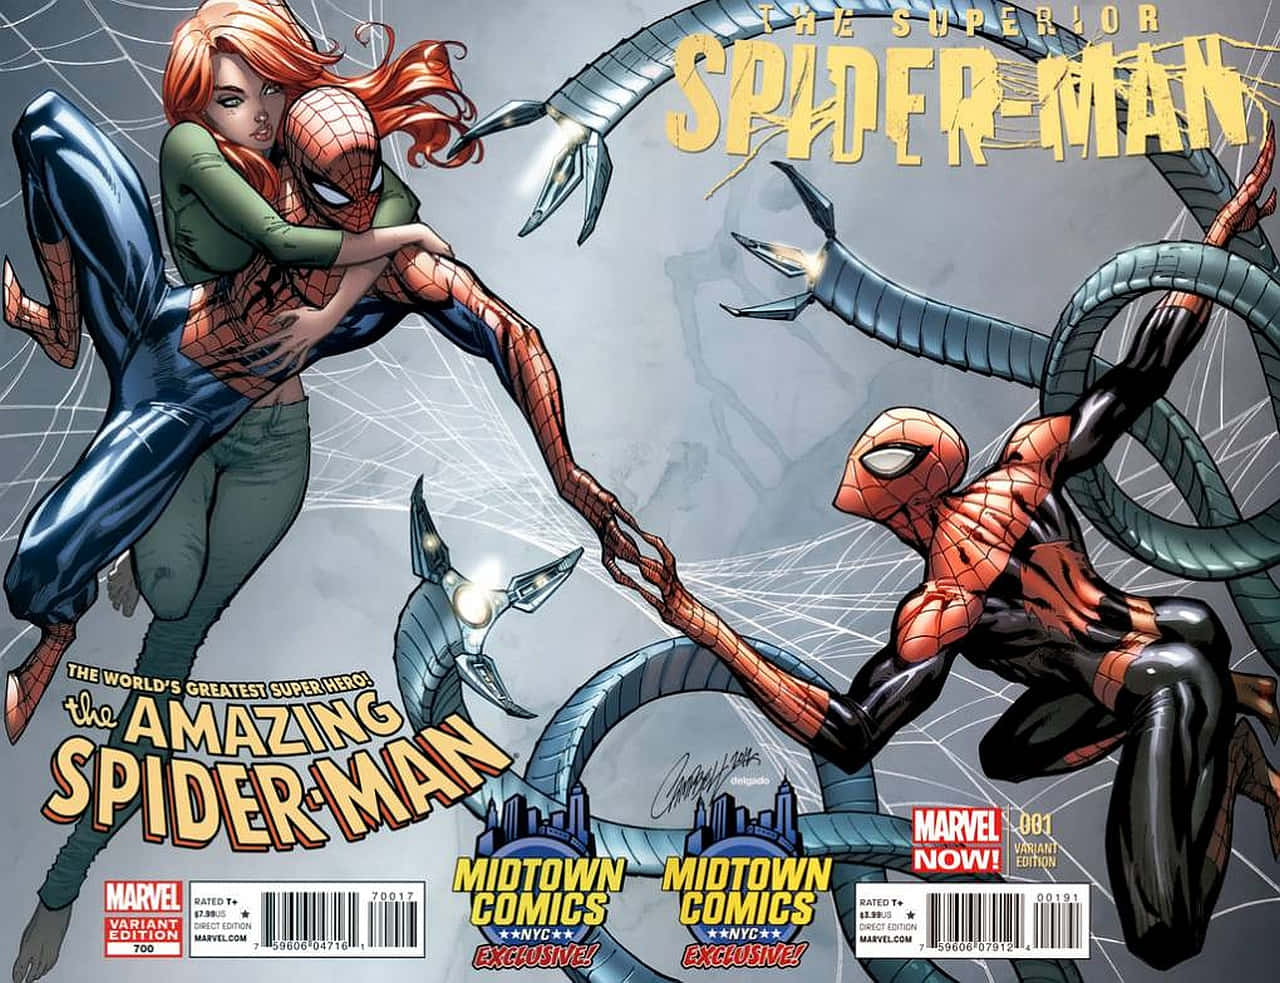 The Superior Spider-Man in action Wallpaper